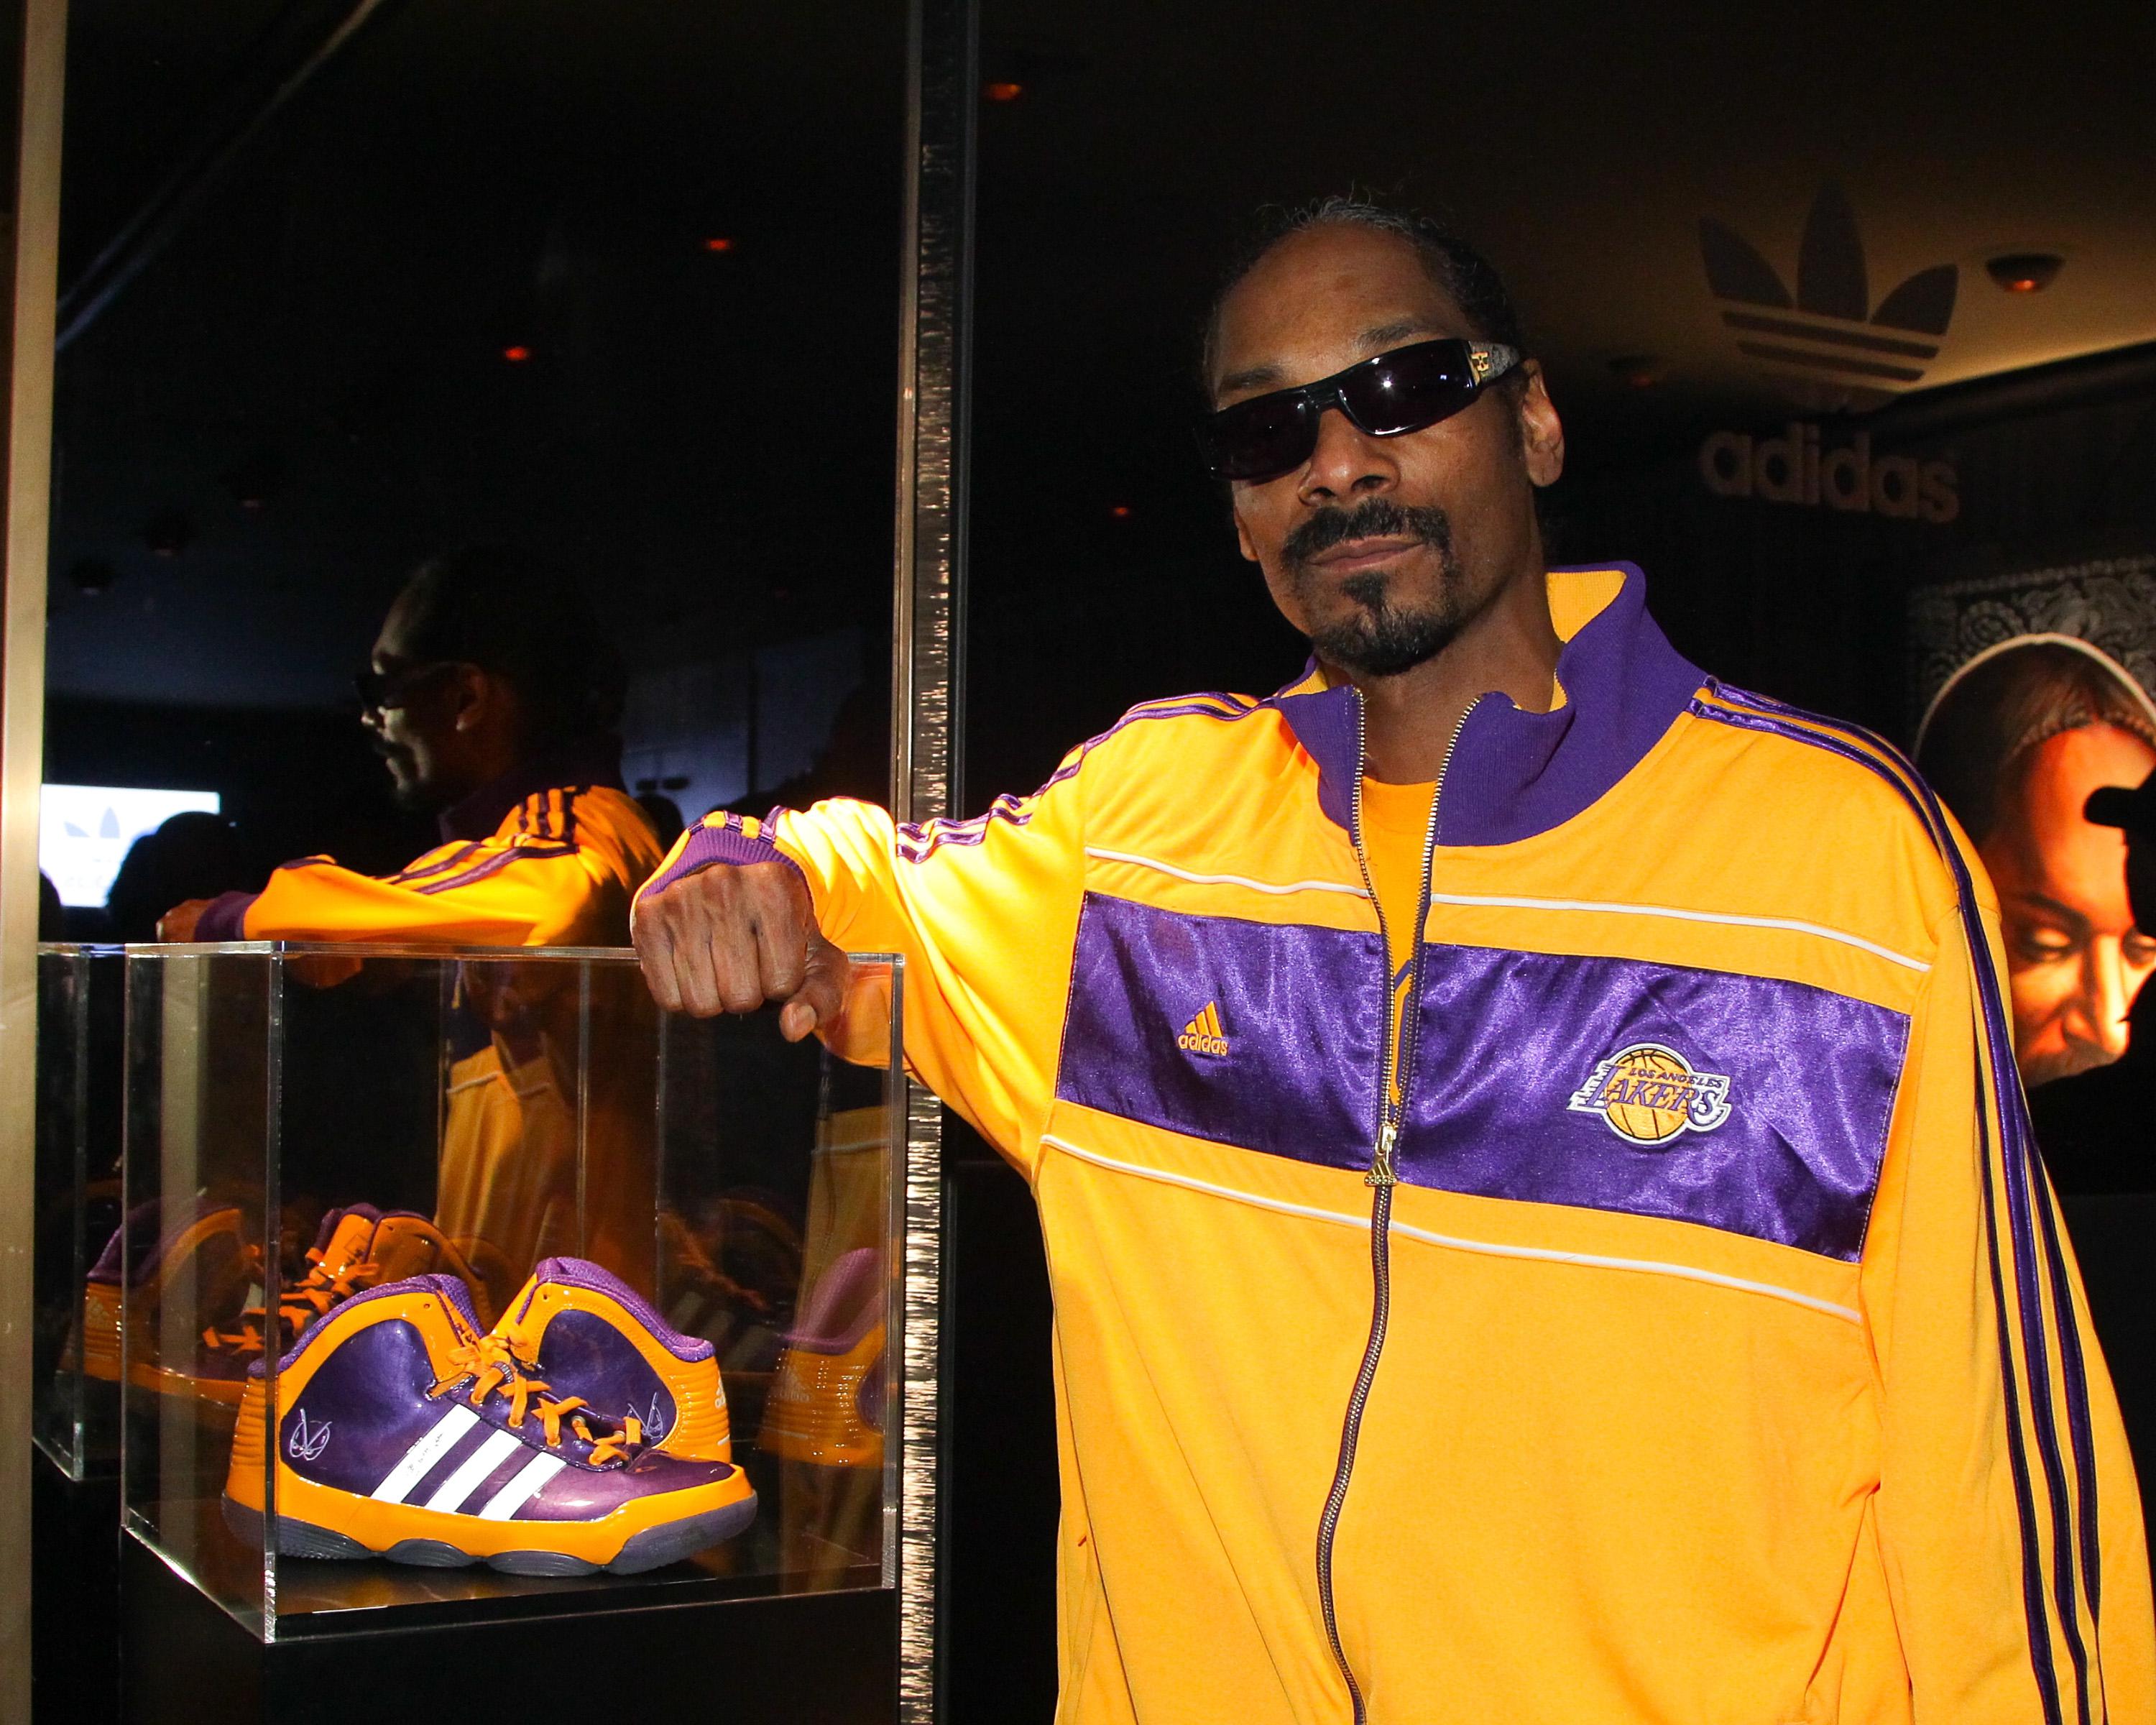 adidas And Snoop Dogg Co-Host ASW Party